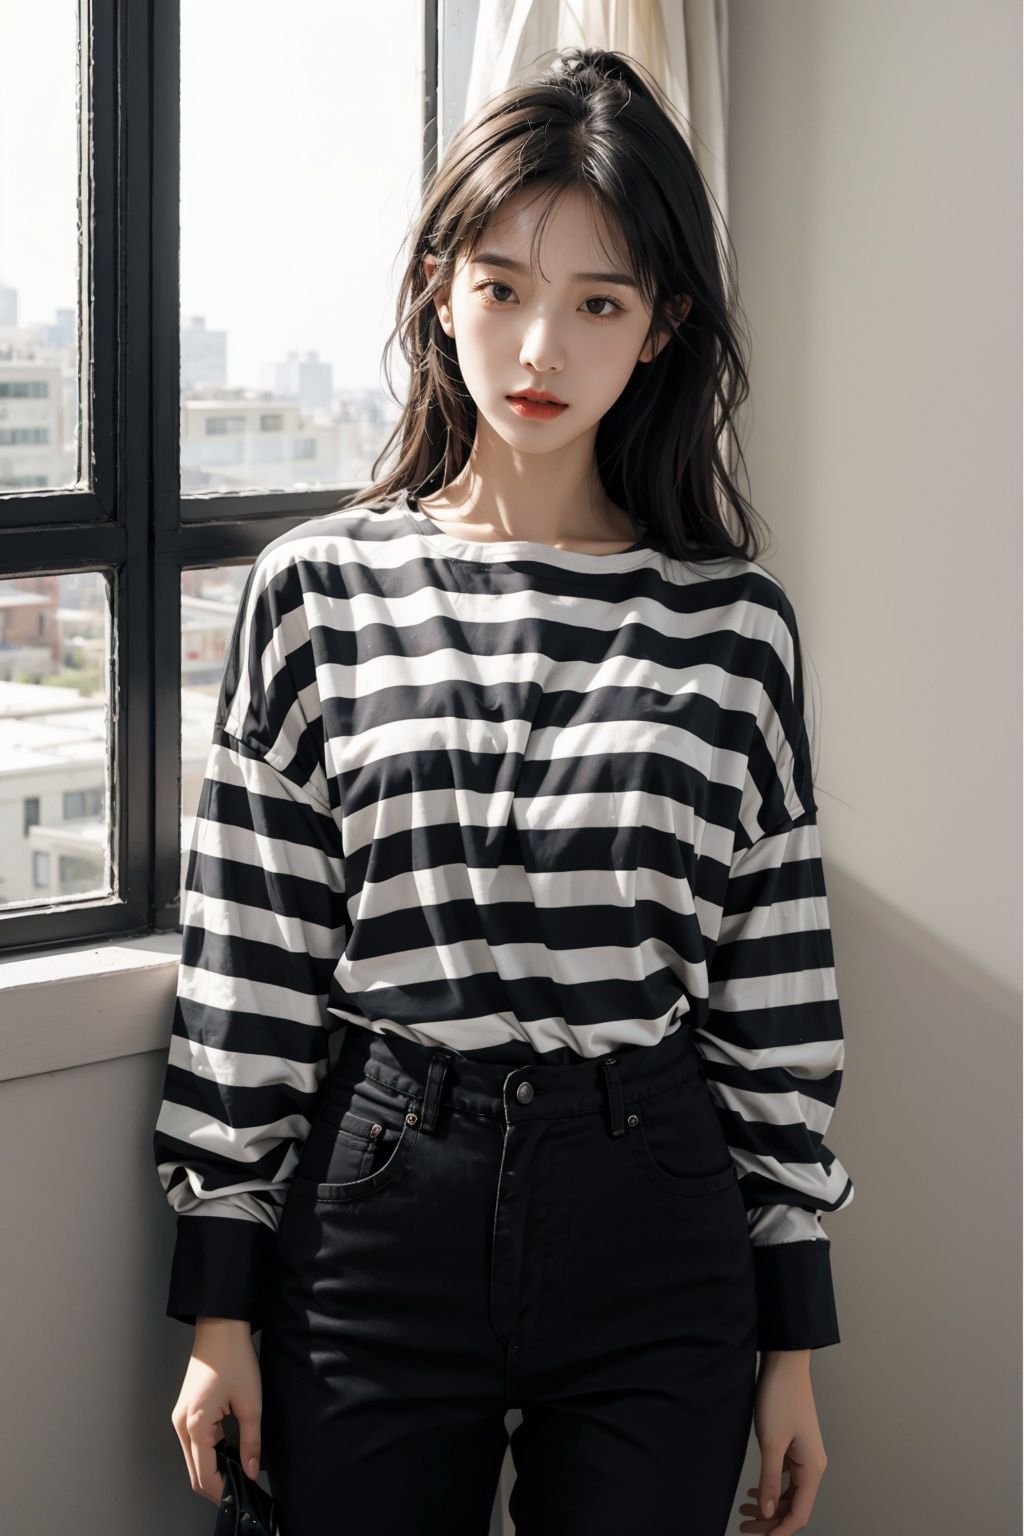  A girl was standing in her Black striped shirt,Wumag